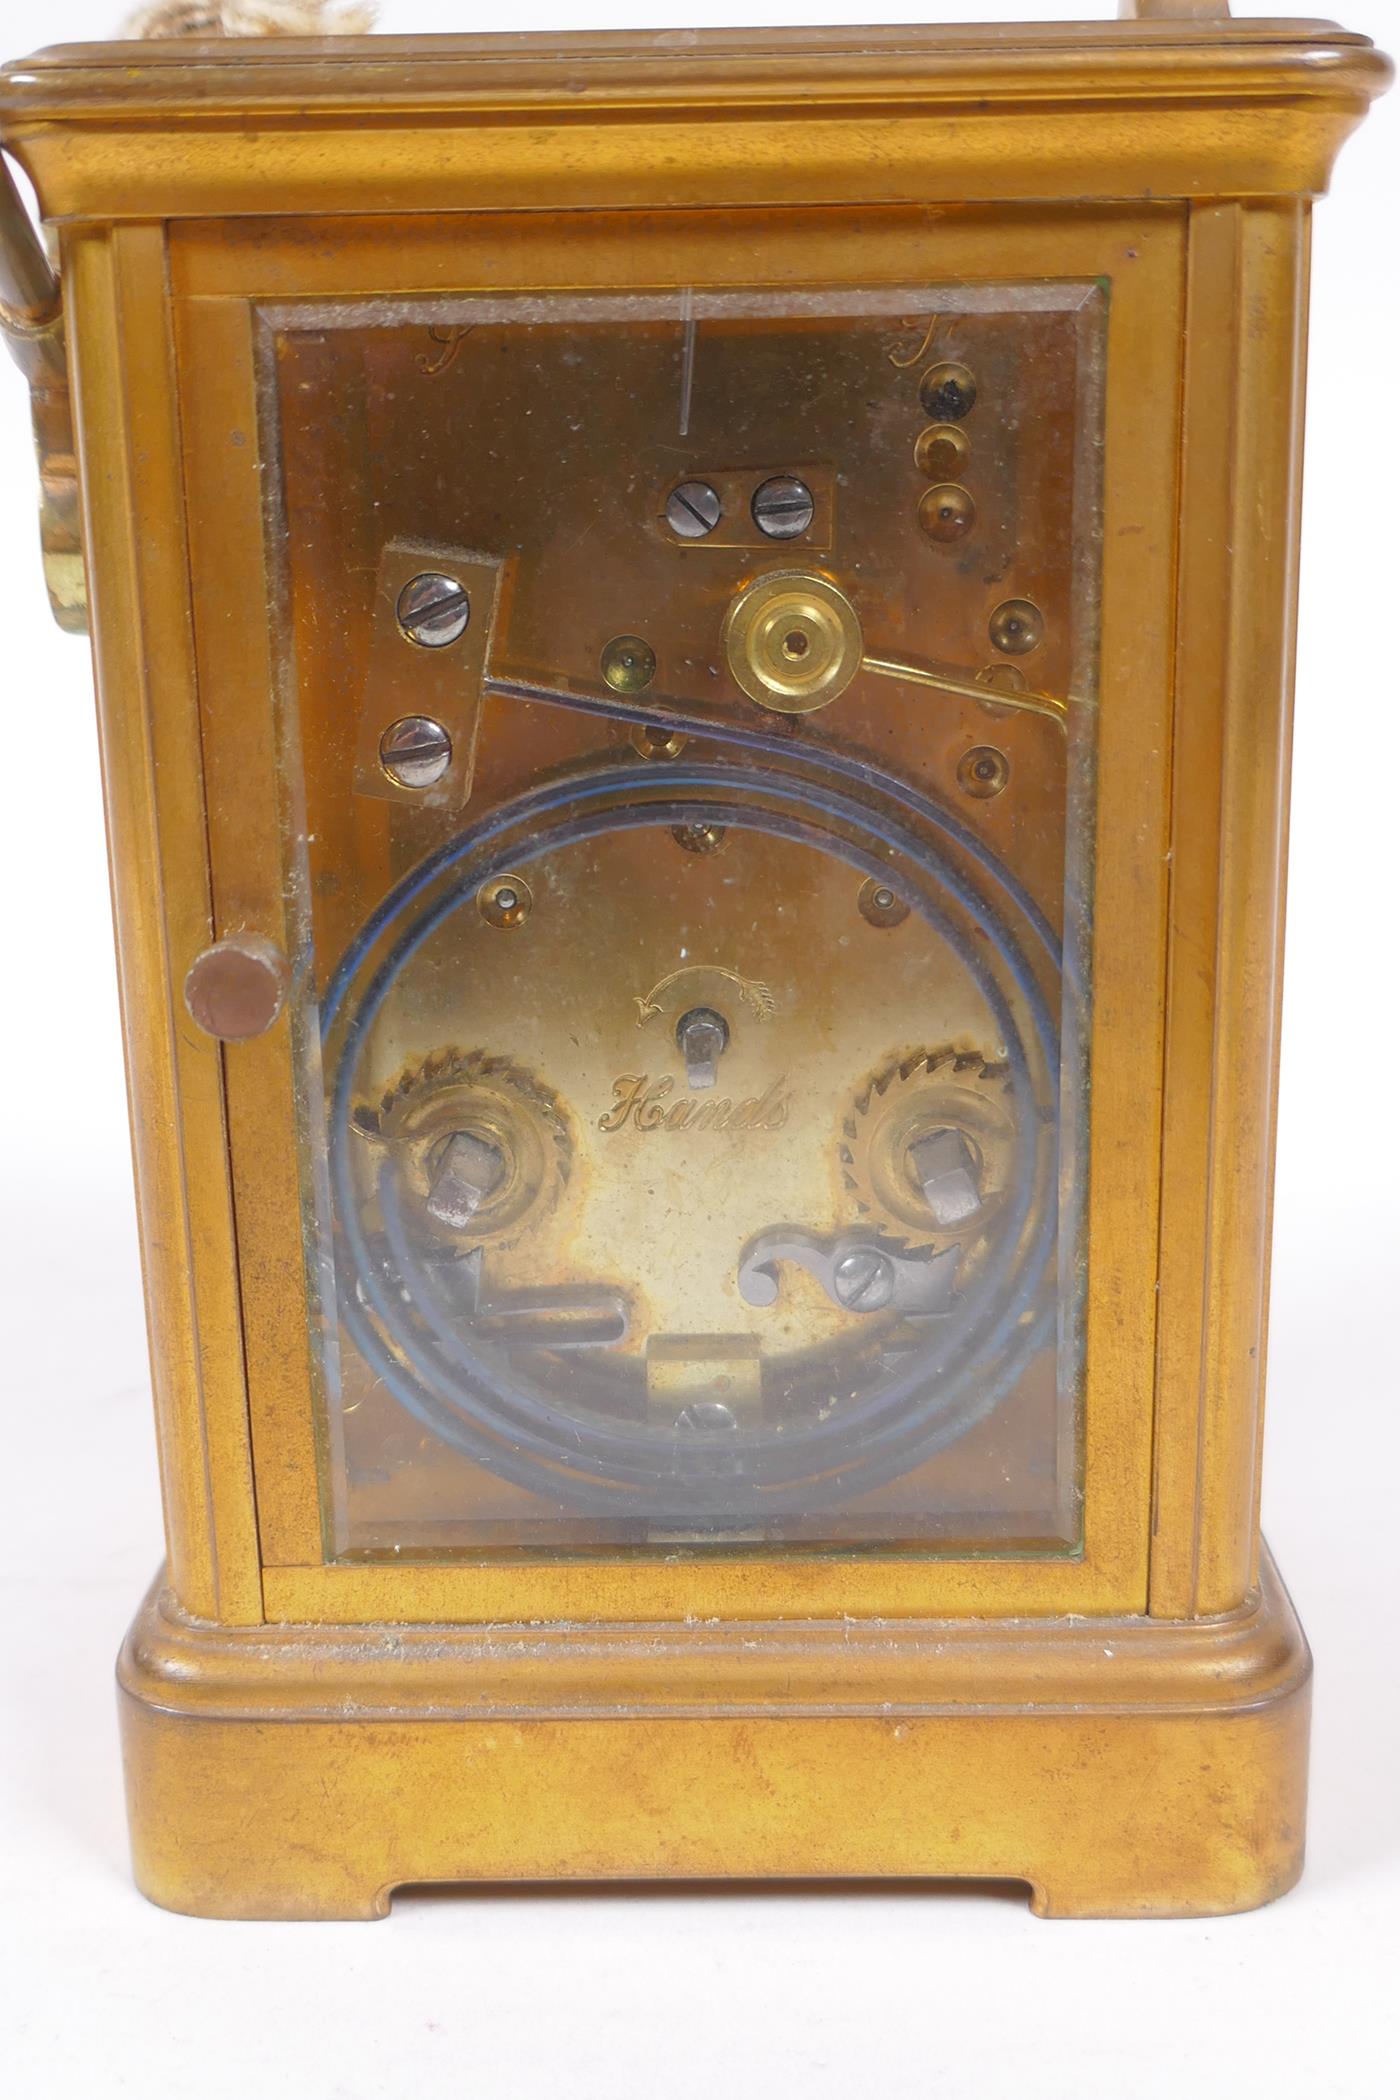 An early C20th French brass carriage clock striking on a gong by Richard & Cie,9 x 8cm, 14cm high - Image 4 of 6